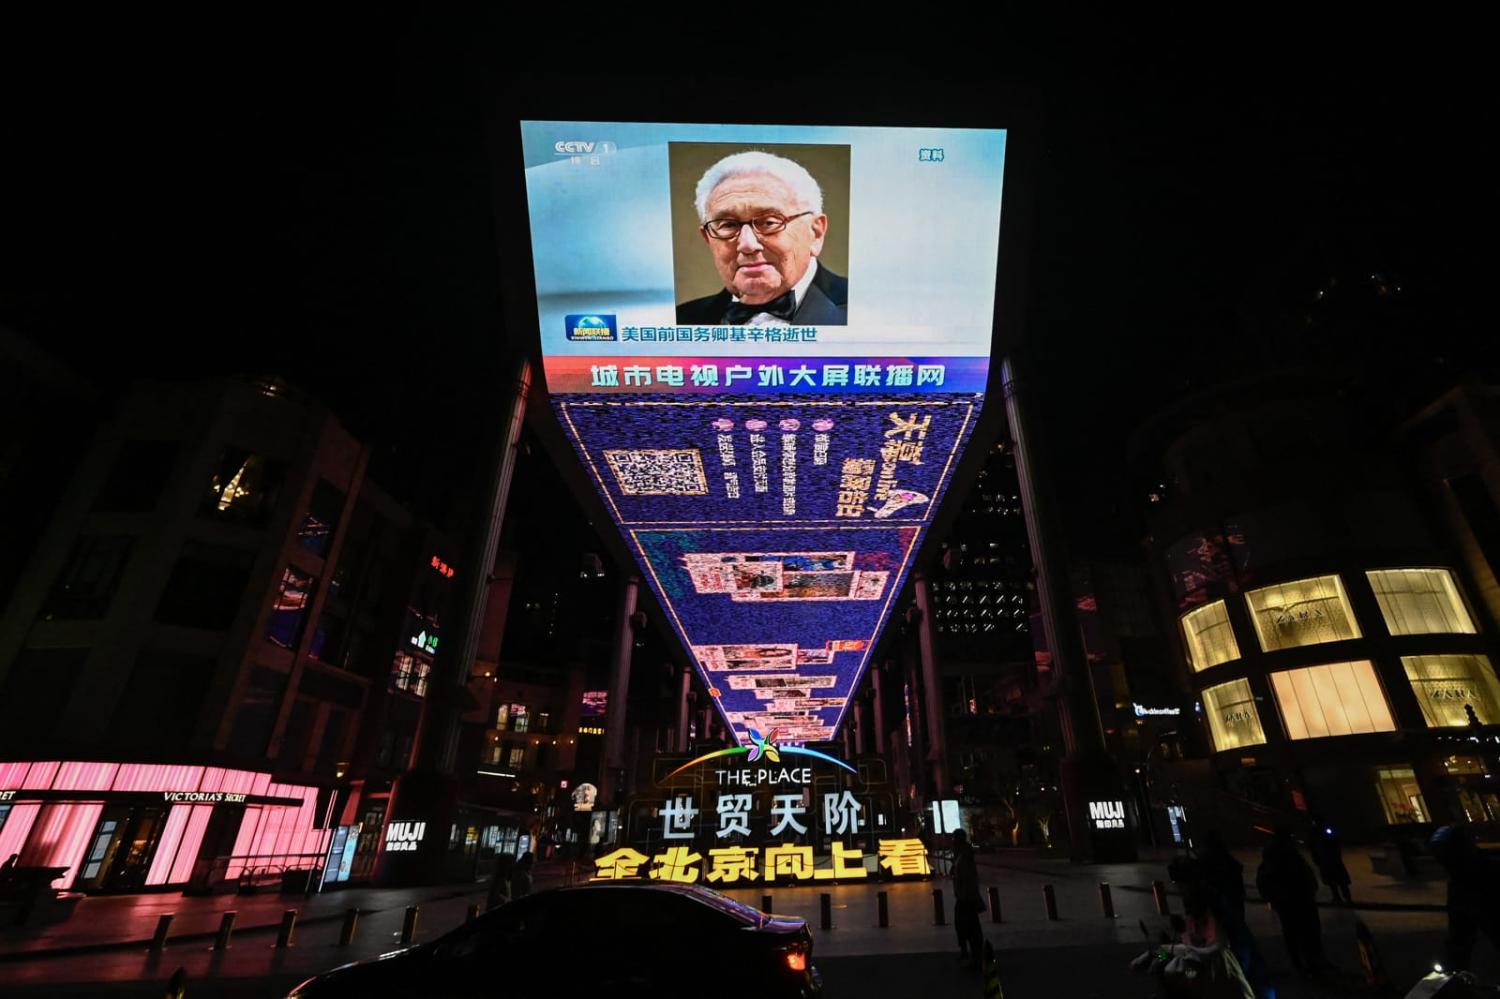 An outdoor screen in Beijing shows a news program following the death of former US Secretary of State Henry Kissinger on 30 November (Pedro Pardo/AFP via Getty Images)